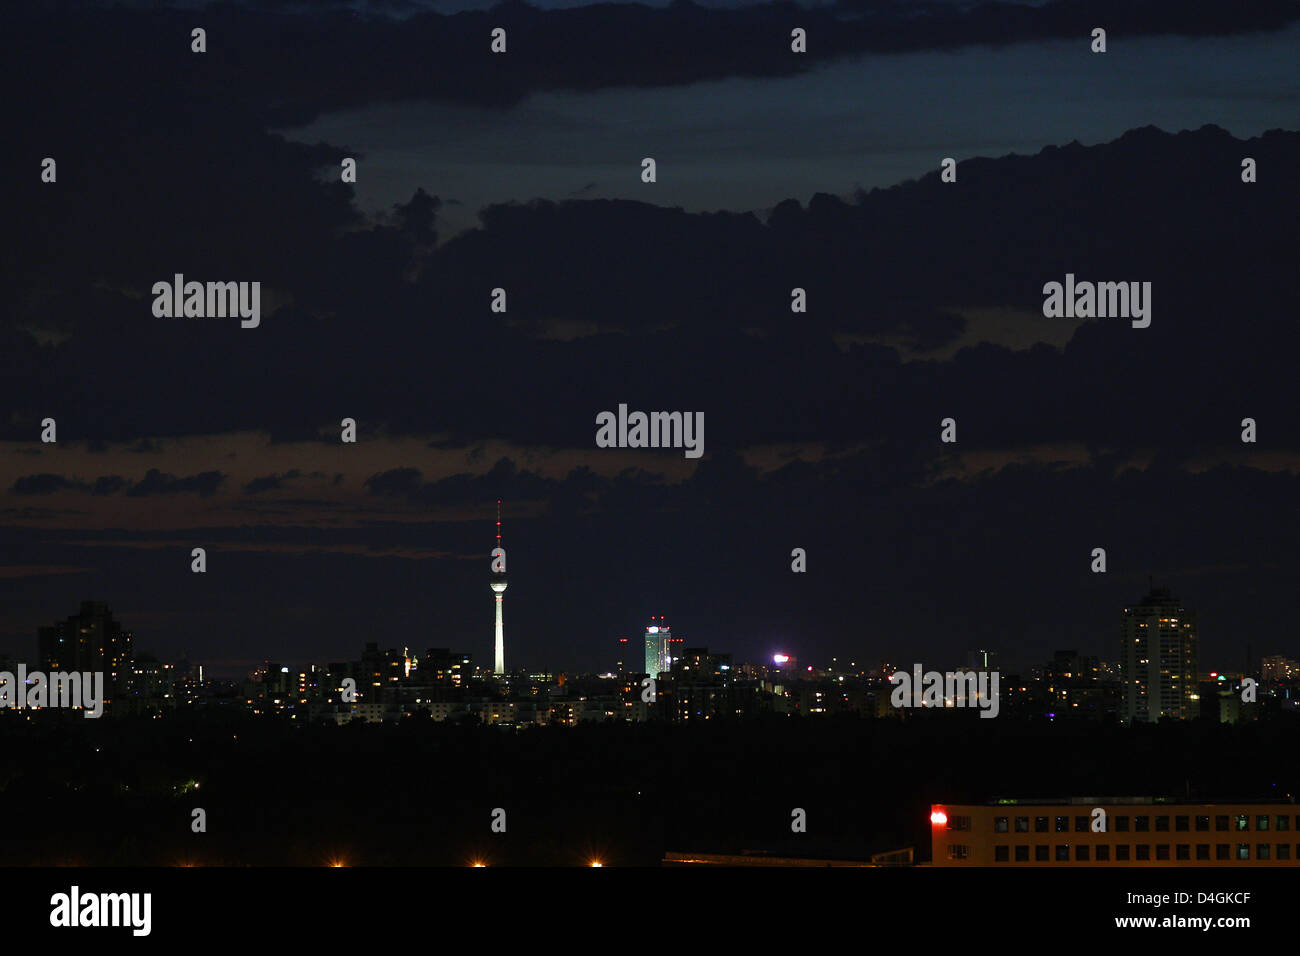 Schoenefeld, Germany, viewed at night from Berlin Schoenefeld airport from Stock Photo